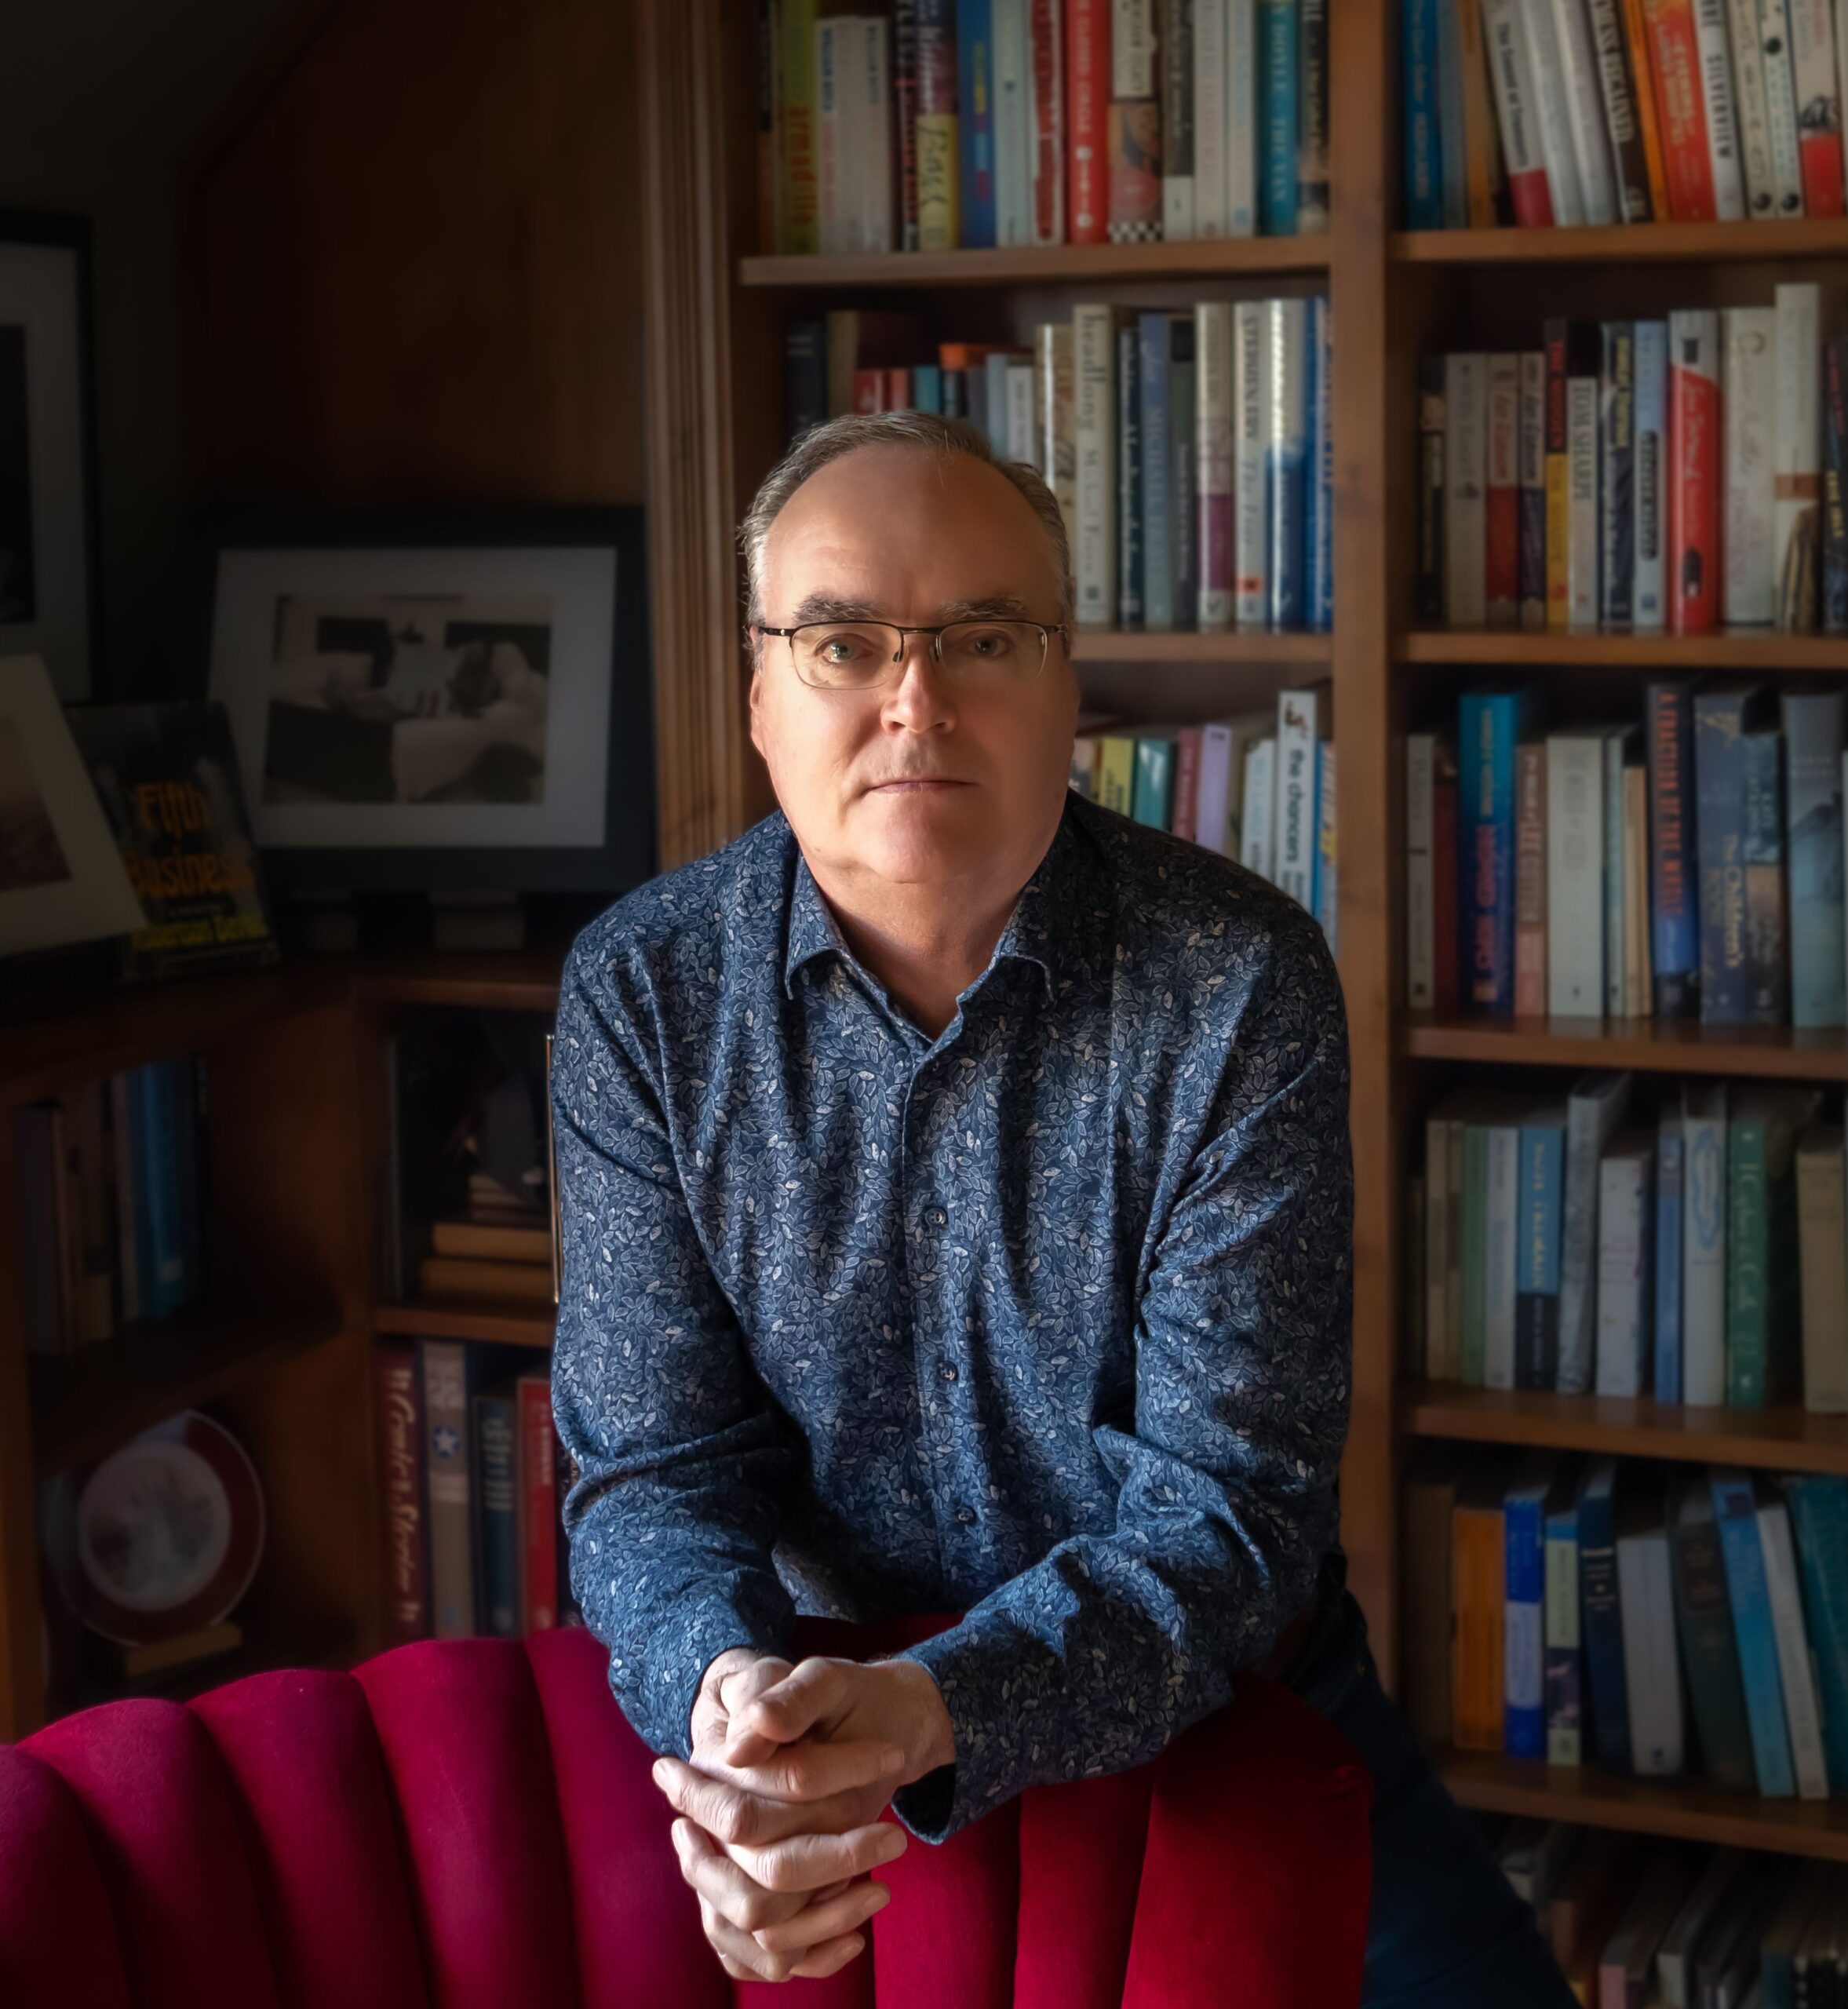 Portrait of Terry Fallis in library